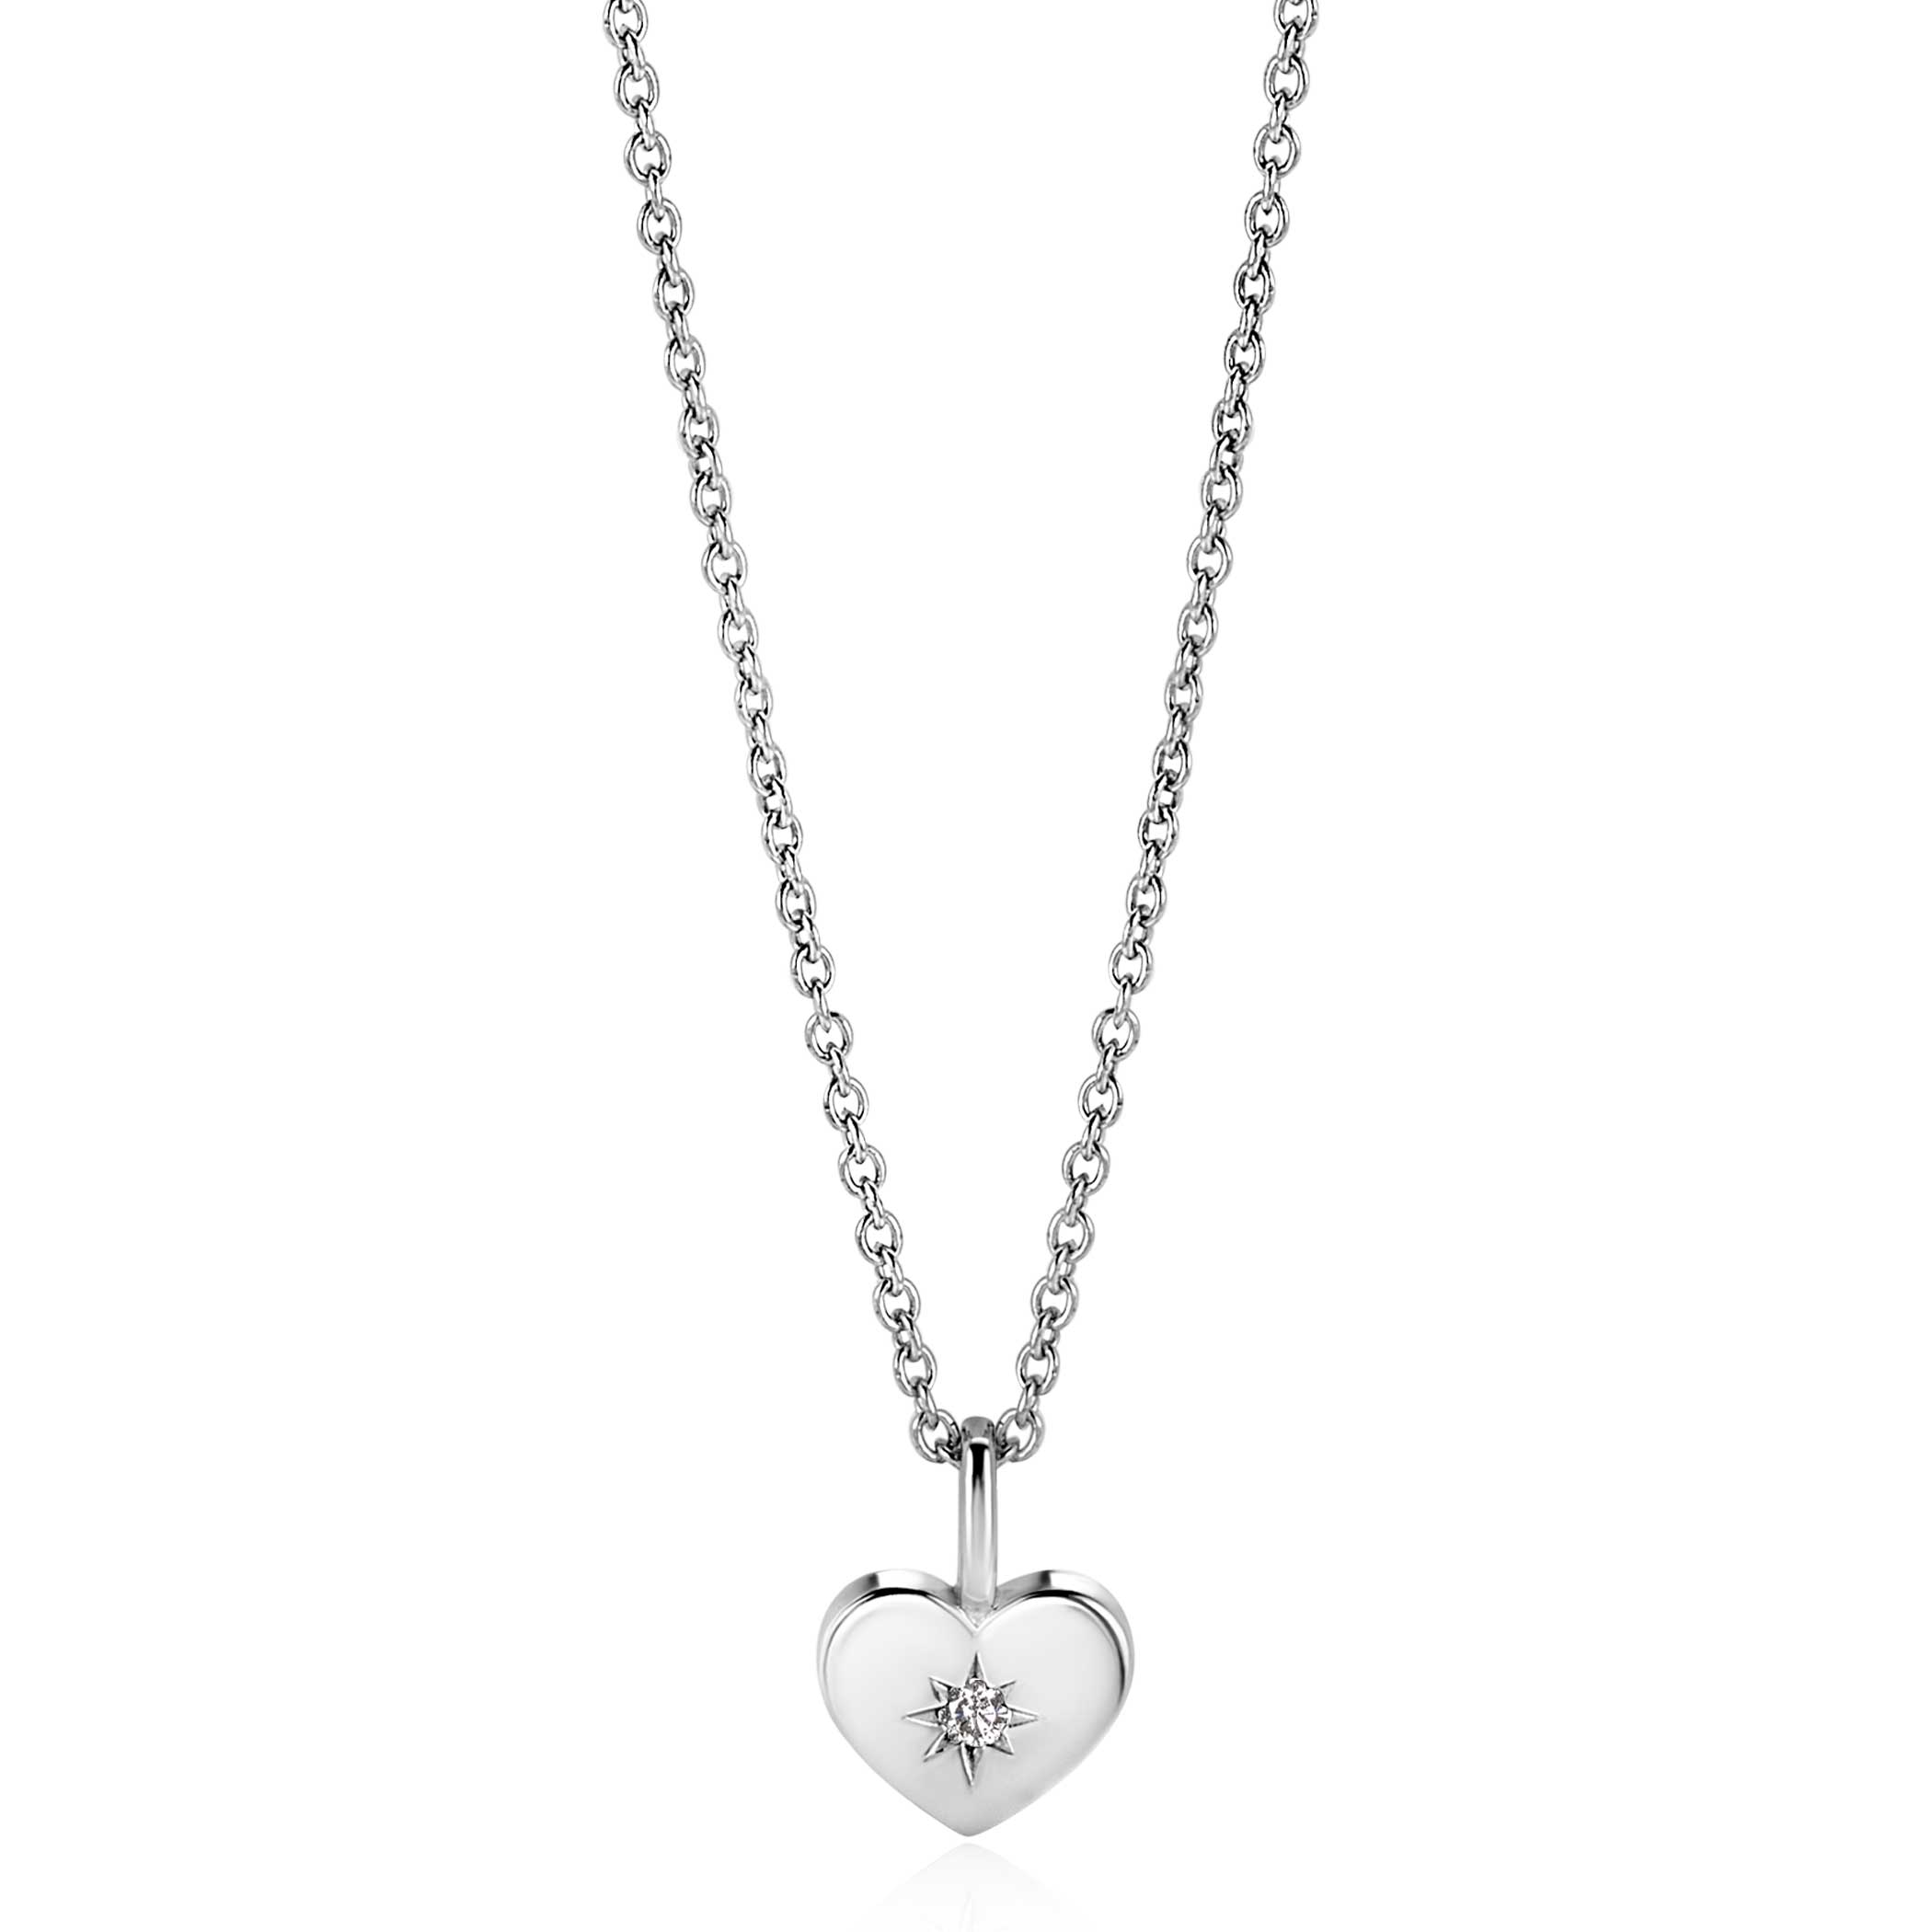 APRIL Pendant 12mm Sterling Silver Heart Birthstone Diamond White Zirconia (excl. necklace)